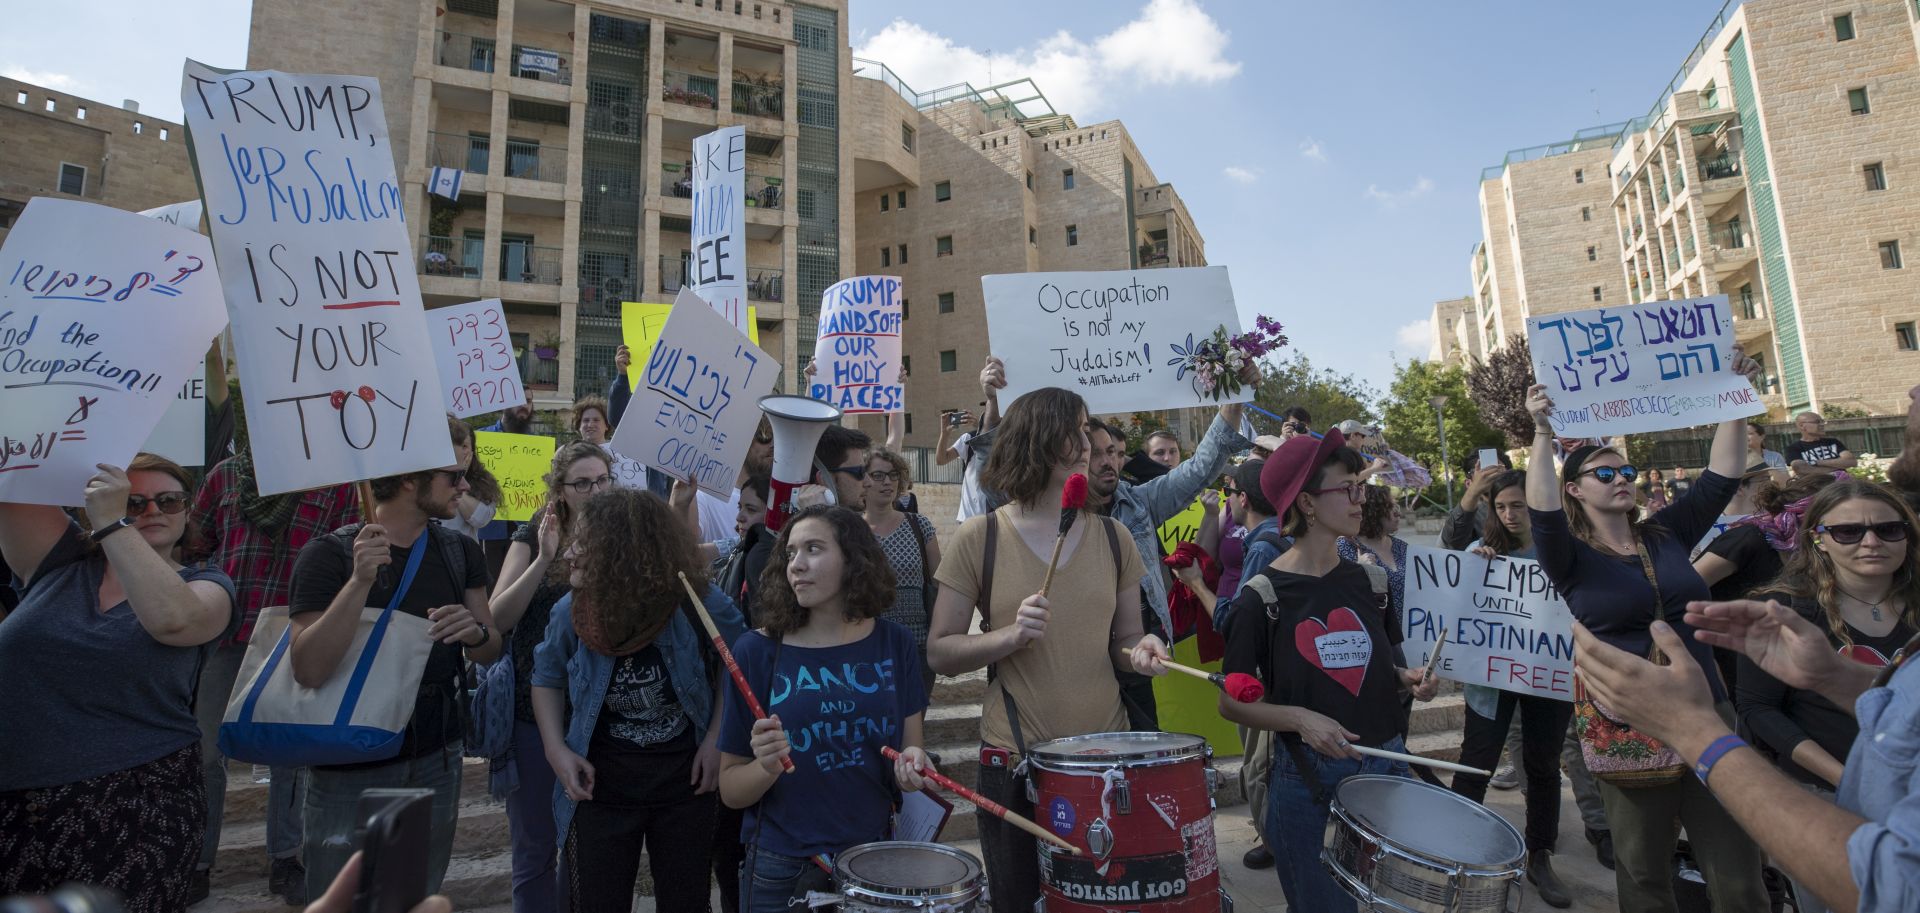 epa06736271 Israeli activists and Palestinians hold banners during a protest outside of the US embassy in Jerusalem, during the official inauguration ceremony, 14 May 2018. The US Embassy in Jerusalem is inaugurated on 14 May following its controversial move from Tel Aviv to the existing US consulate building in Jerusalem. US President Trump in December 2017 recognized Jerusalem as Israel's capital. The decision, condemned by Palestinians who claim East Jerusalem as the capital of a future state, prompted worldwide protests and was met with widespread international criticism.  EPA/ATEF SAFADI